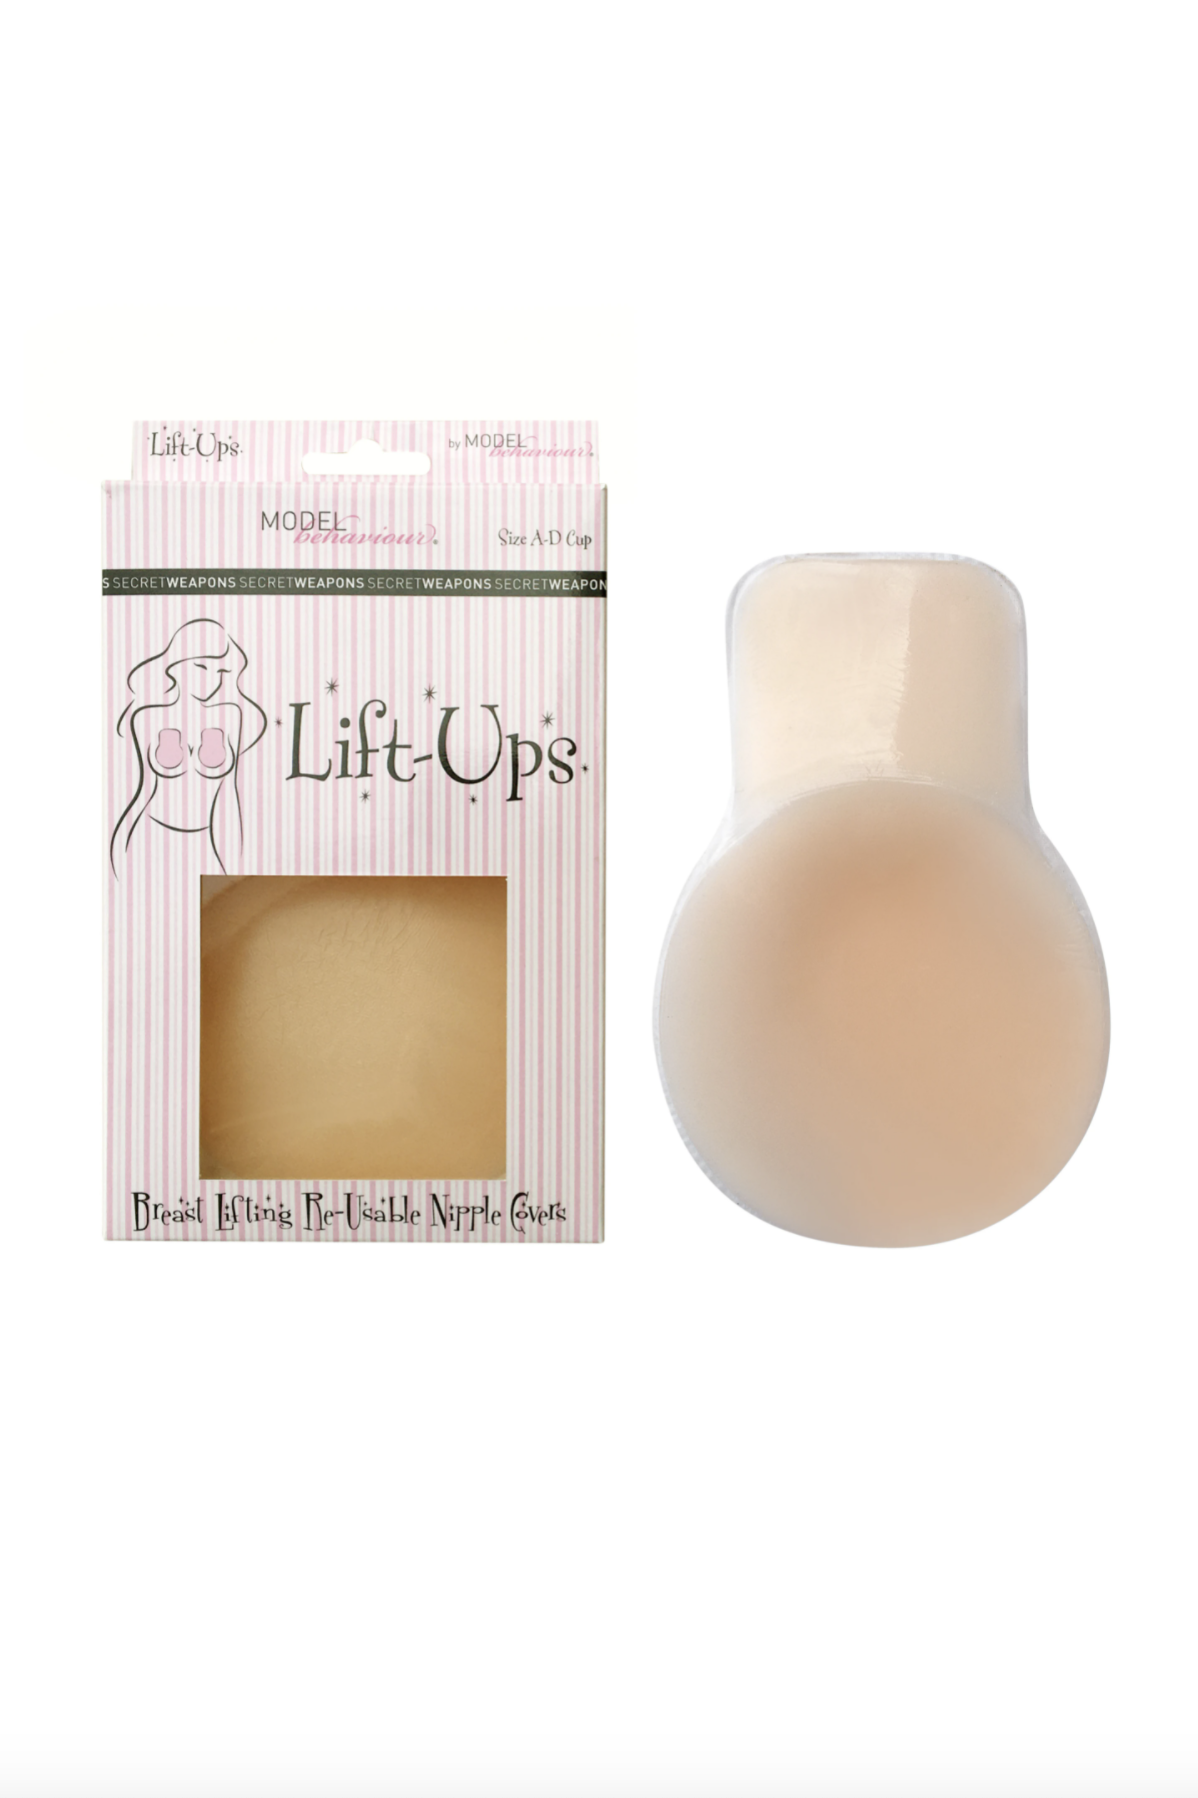 SECRET WEAPONS BREAST LIFT UP'S NIPPLE COVER SWO47 - Lady Bird